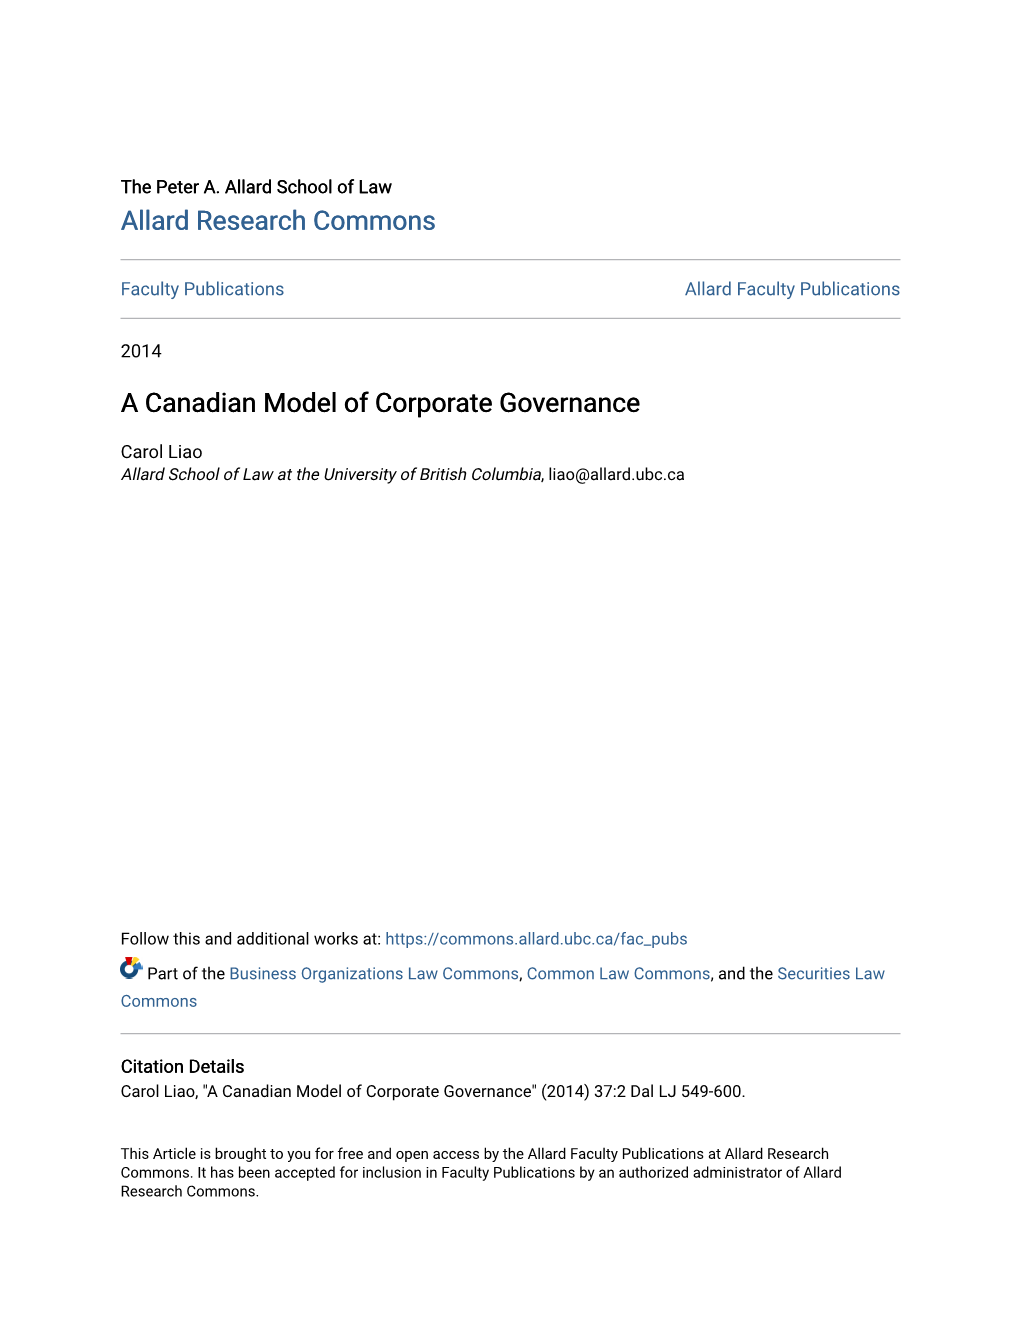 A Canadian Model of Corporate Governance